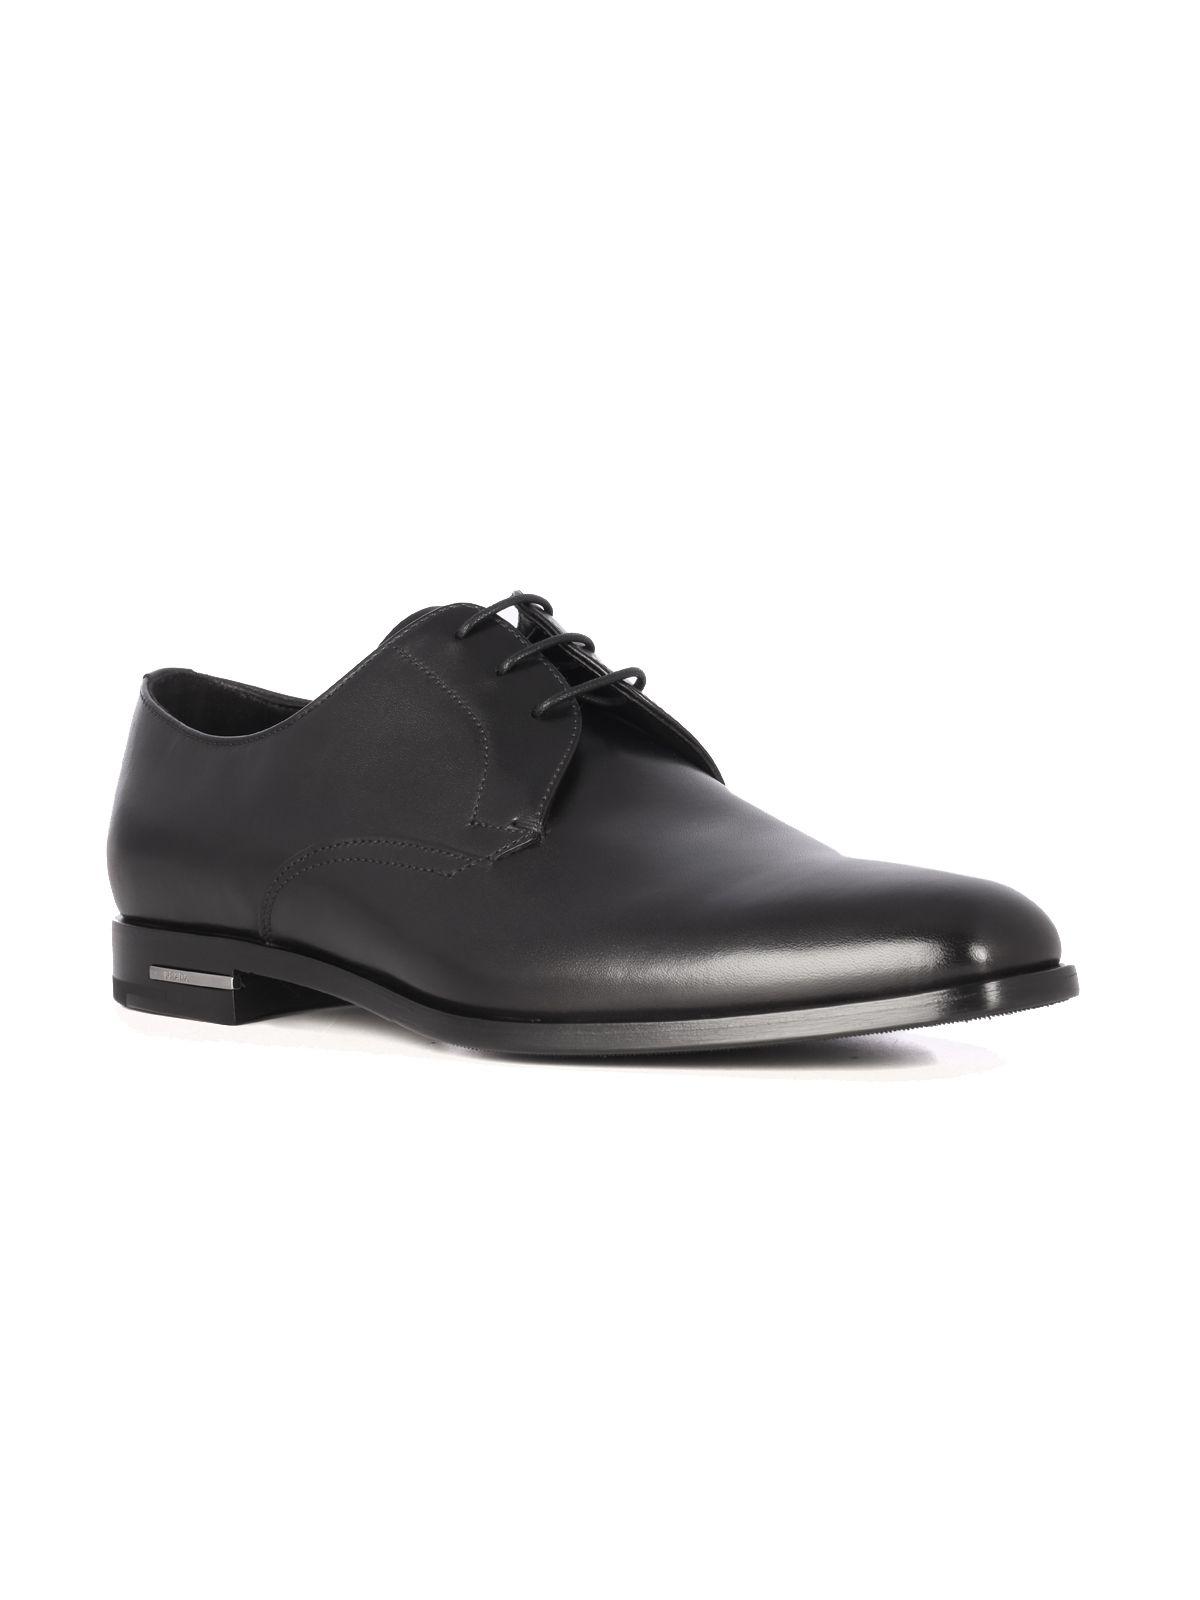 Prada Leather Lace-up Shoes in Black for Men - Lyst